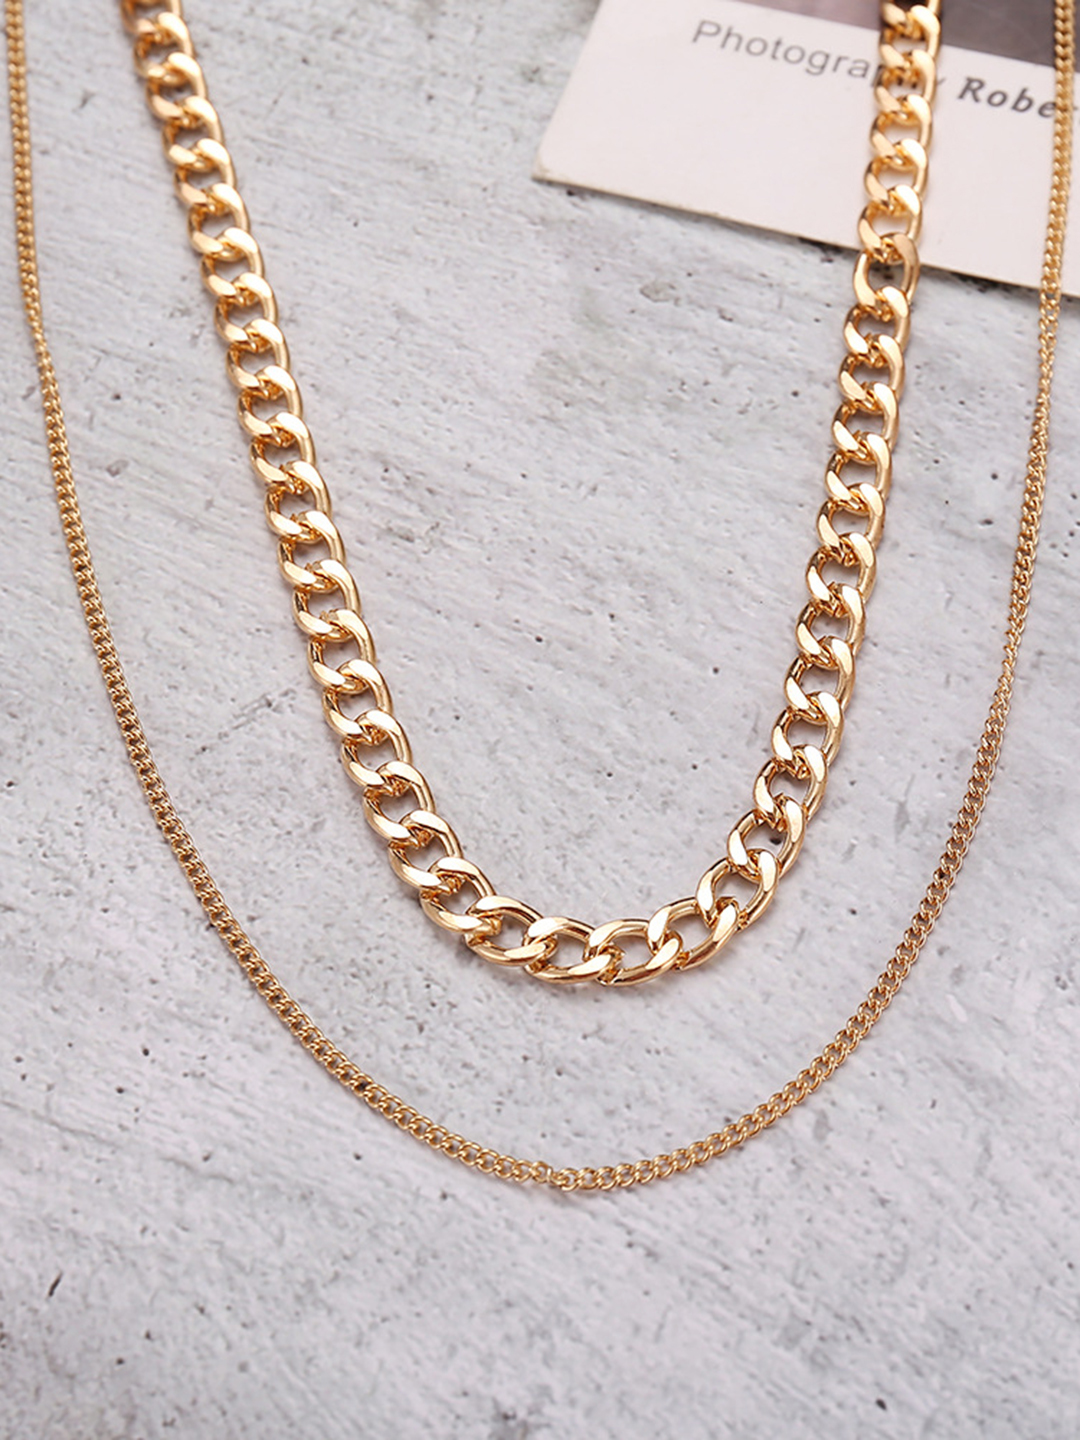 Charming Gold Plated Double Layered Chunky Chain Link Necklace for Women and Girls